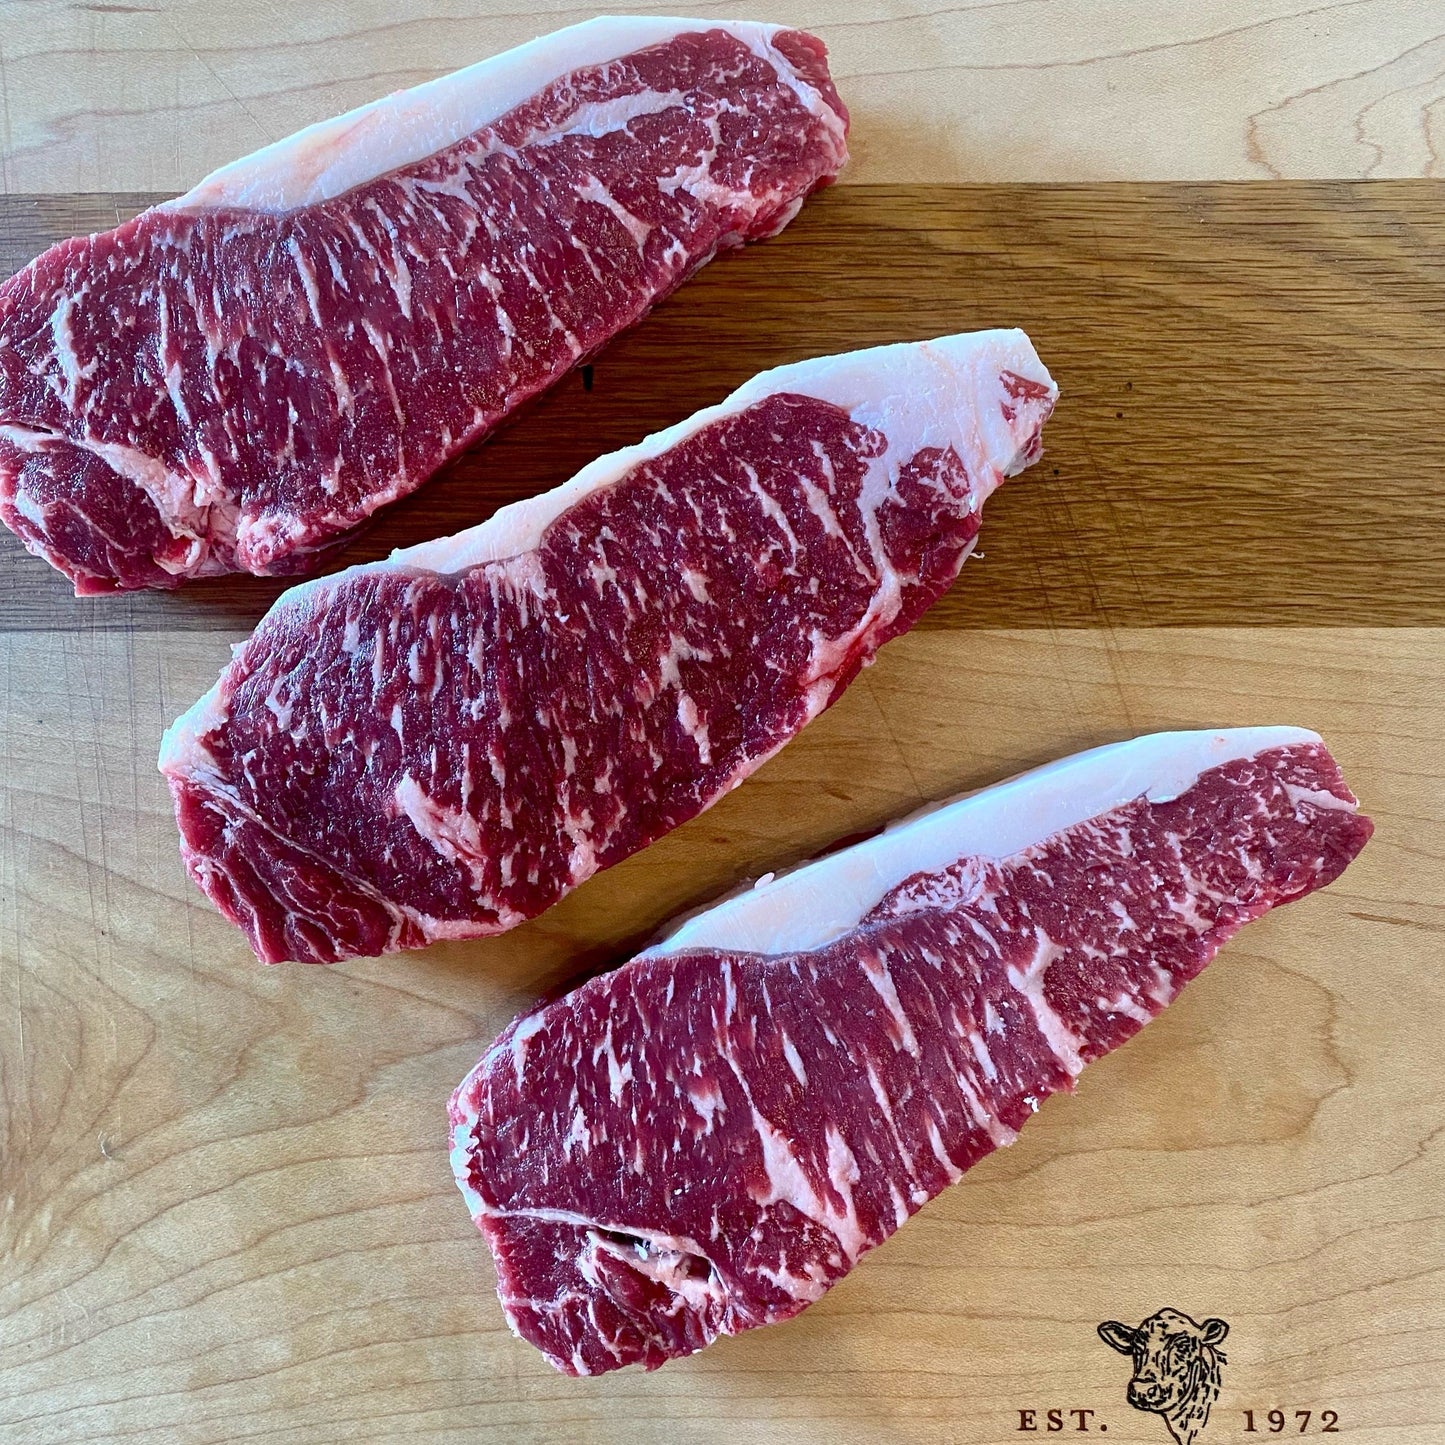 February 6th: All Things Steak with the Butchers